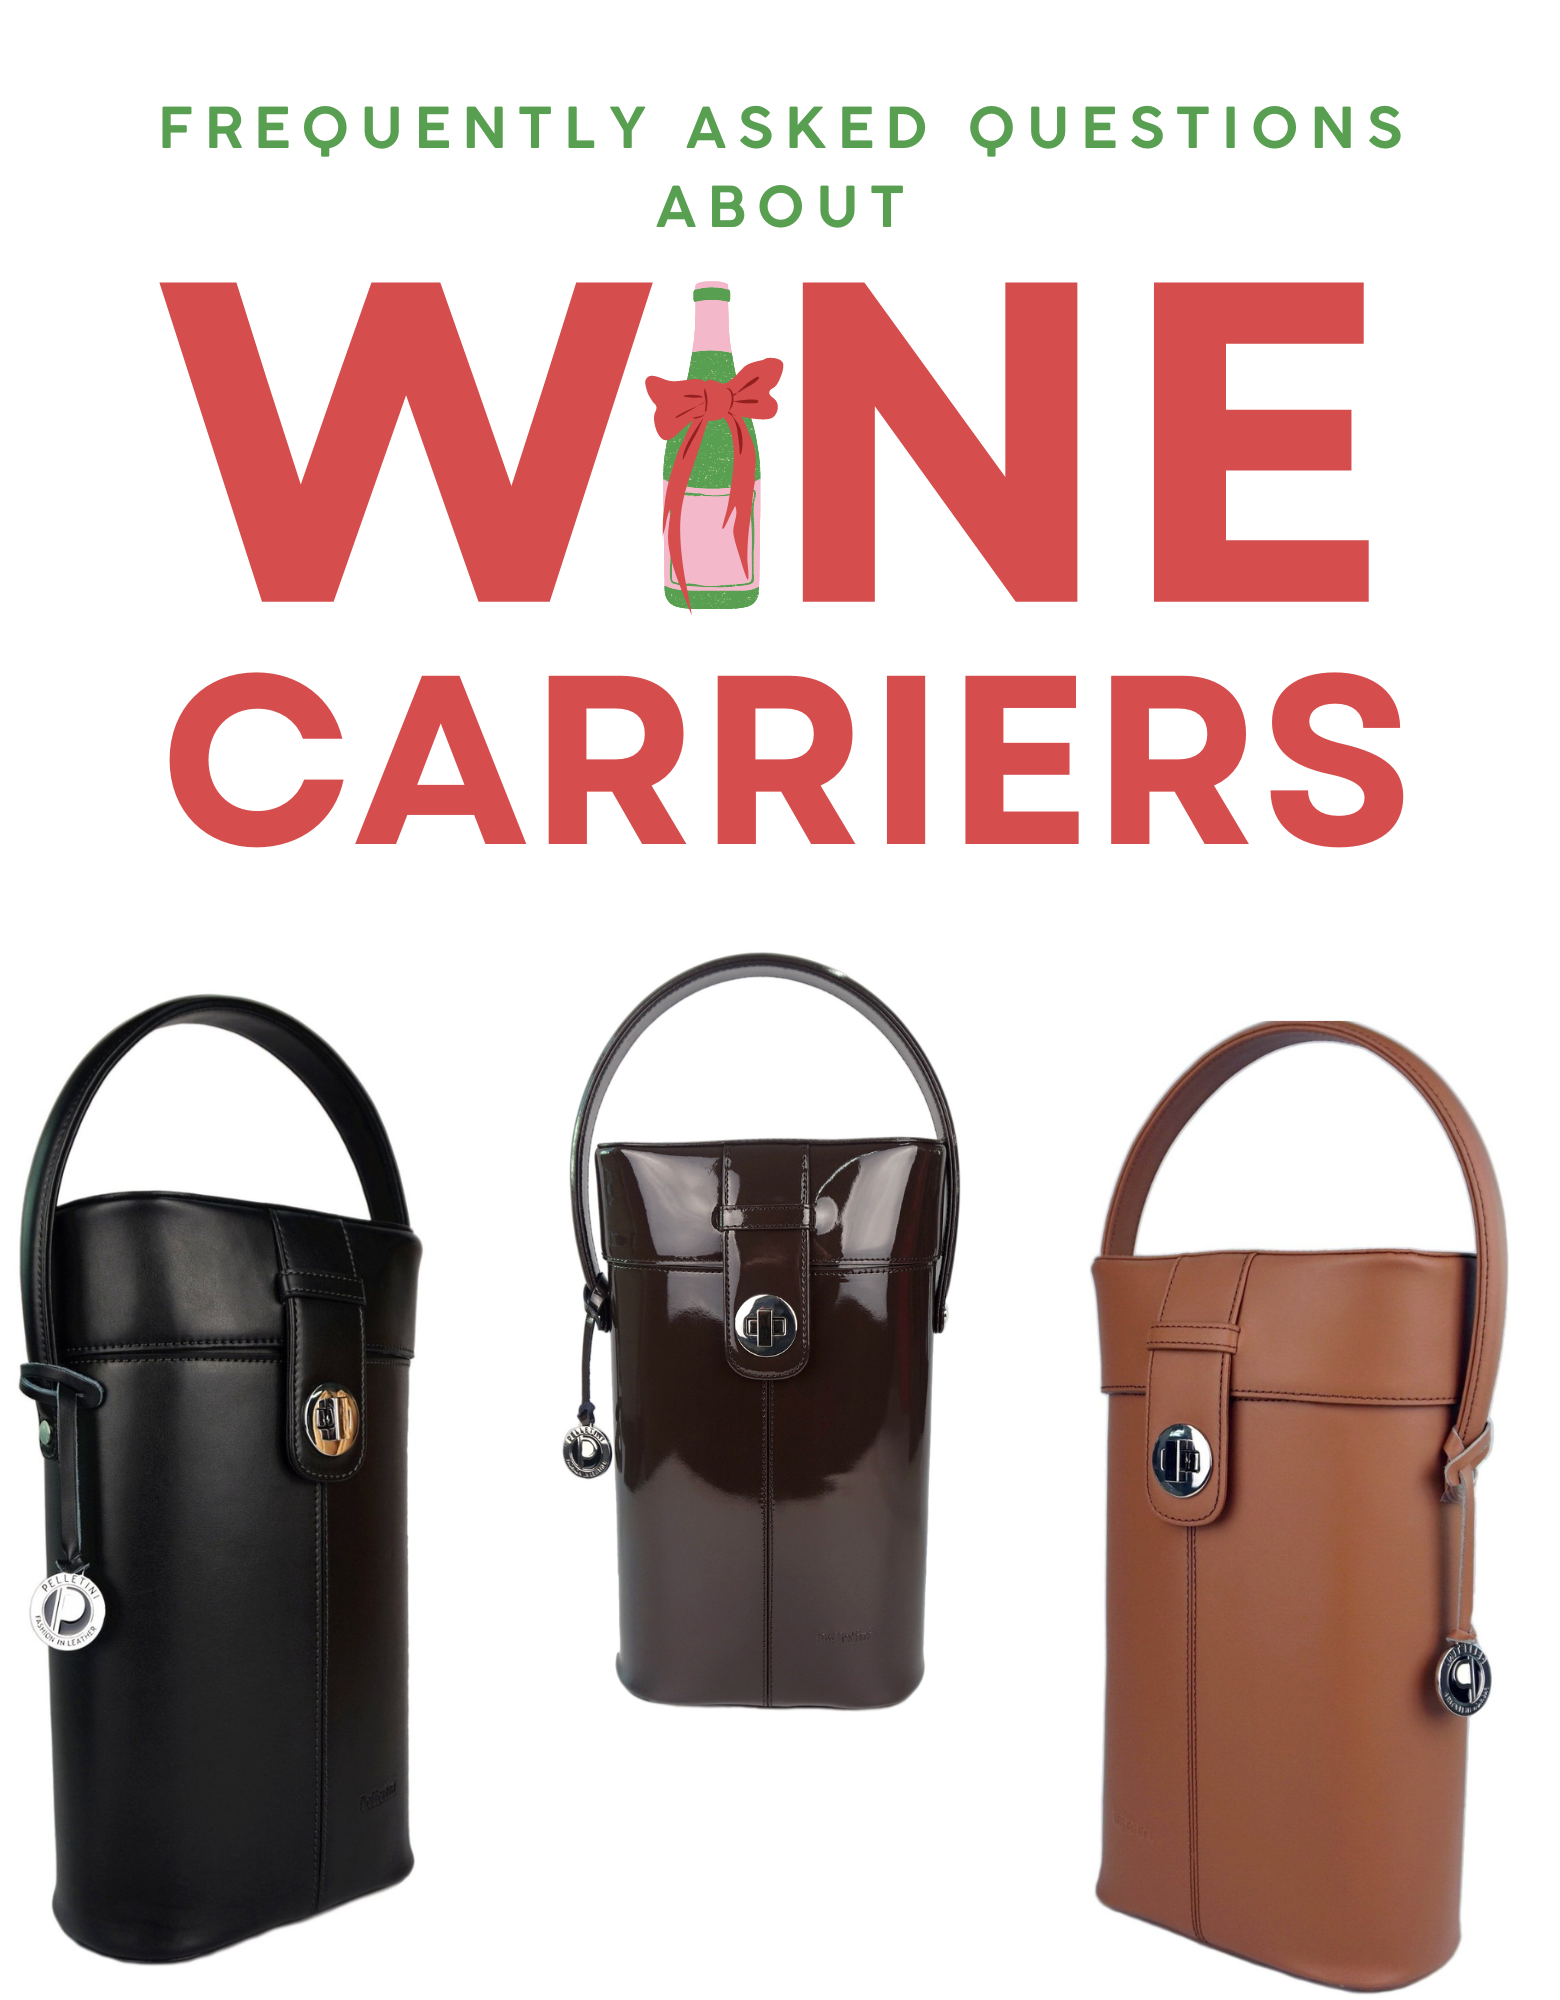 Frequently Asked Questions About Wine Carriers